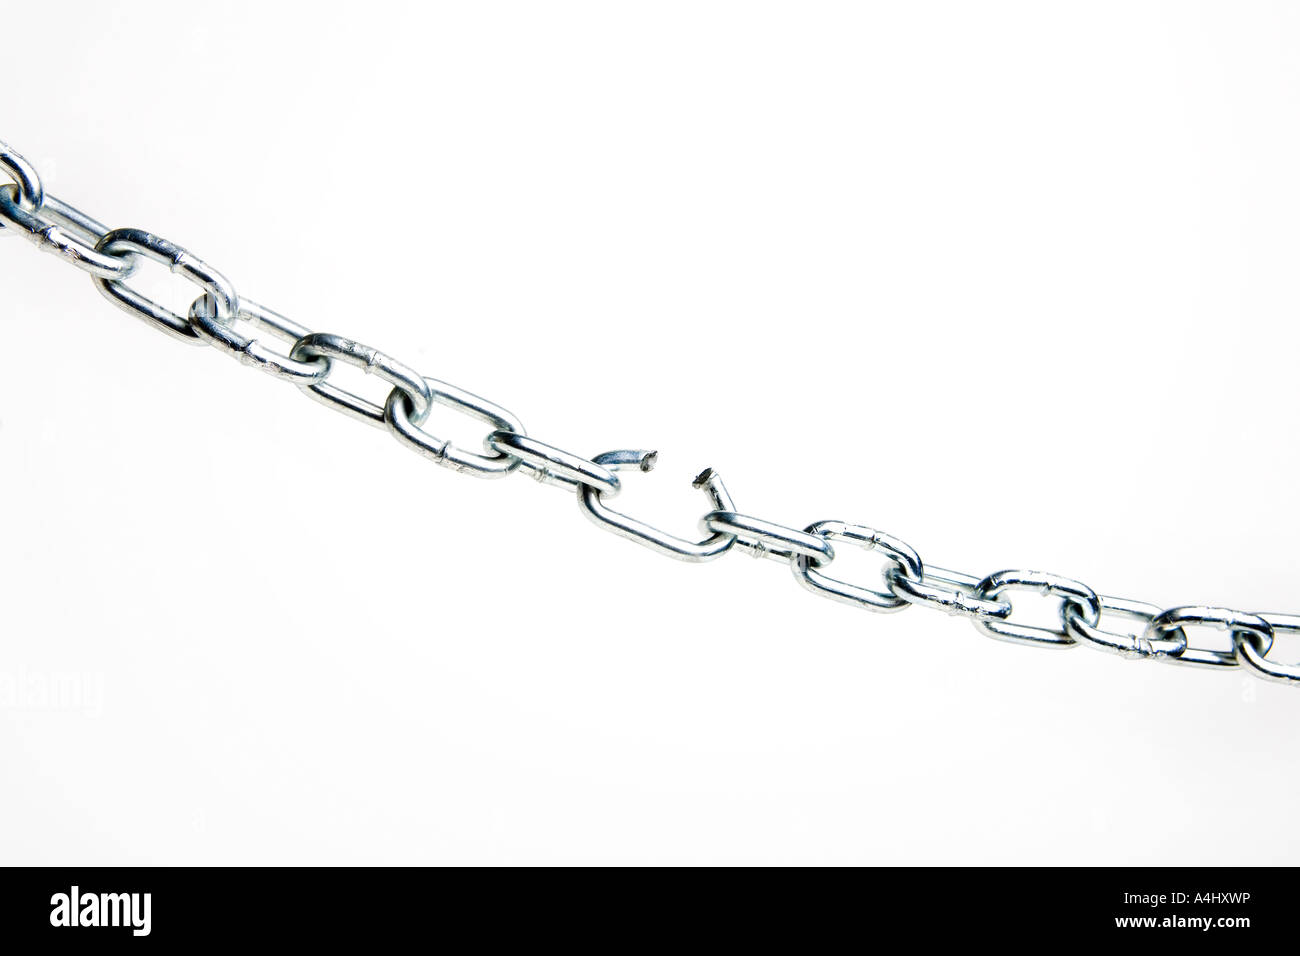 Broken link in a silver chain Stock Photo